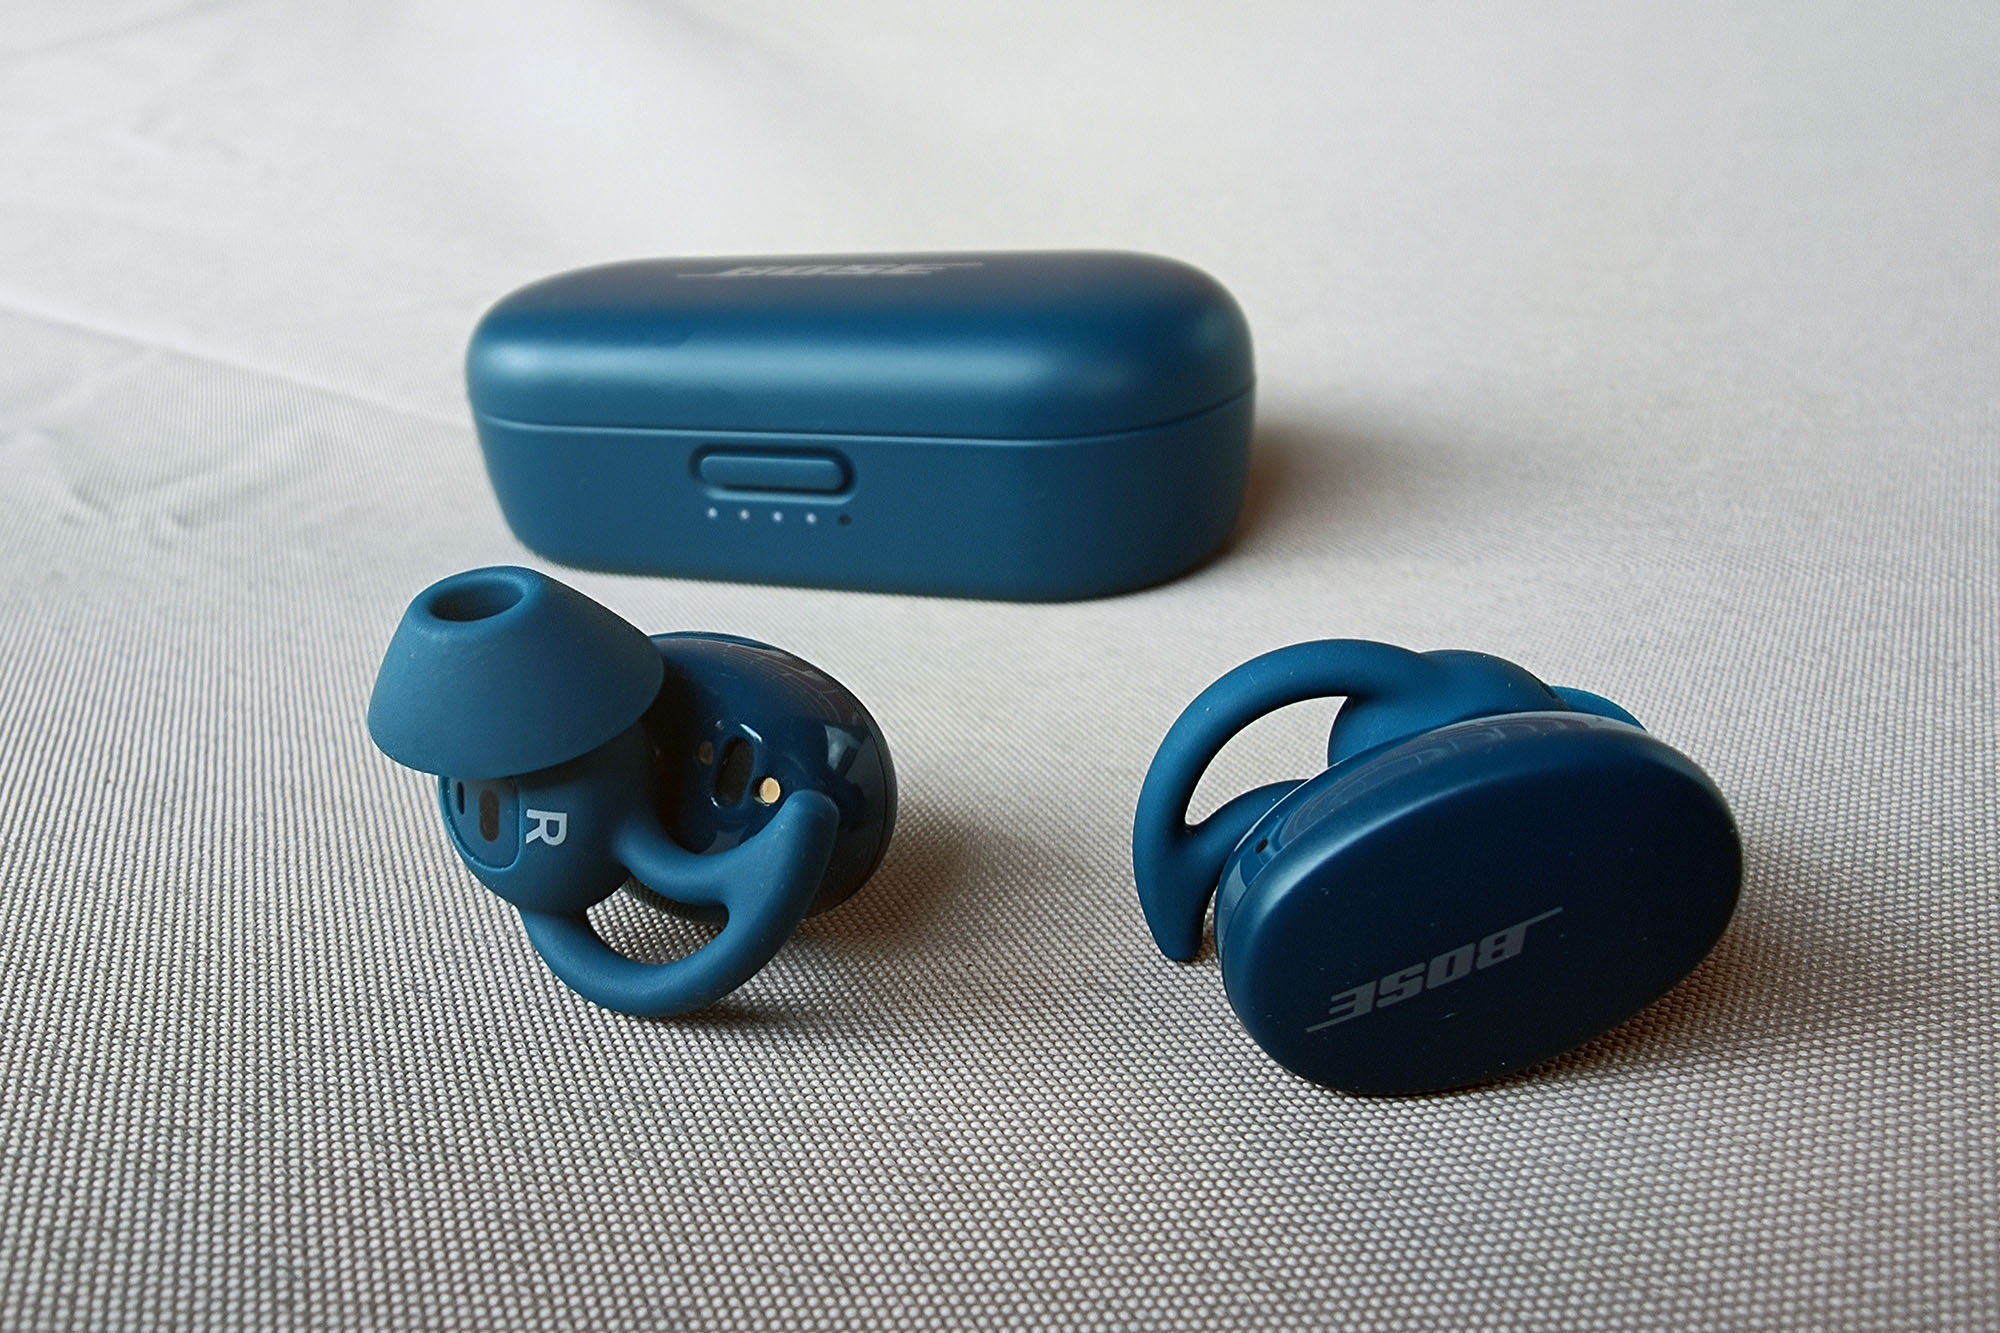 Bose sports earbuds